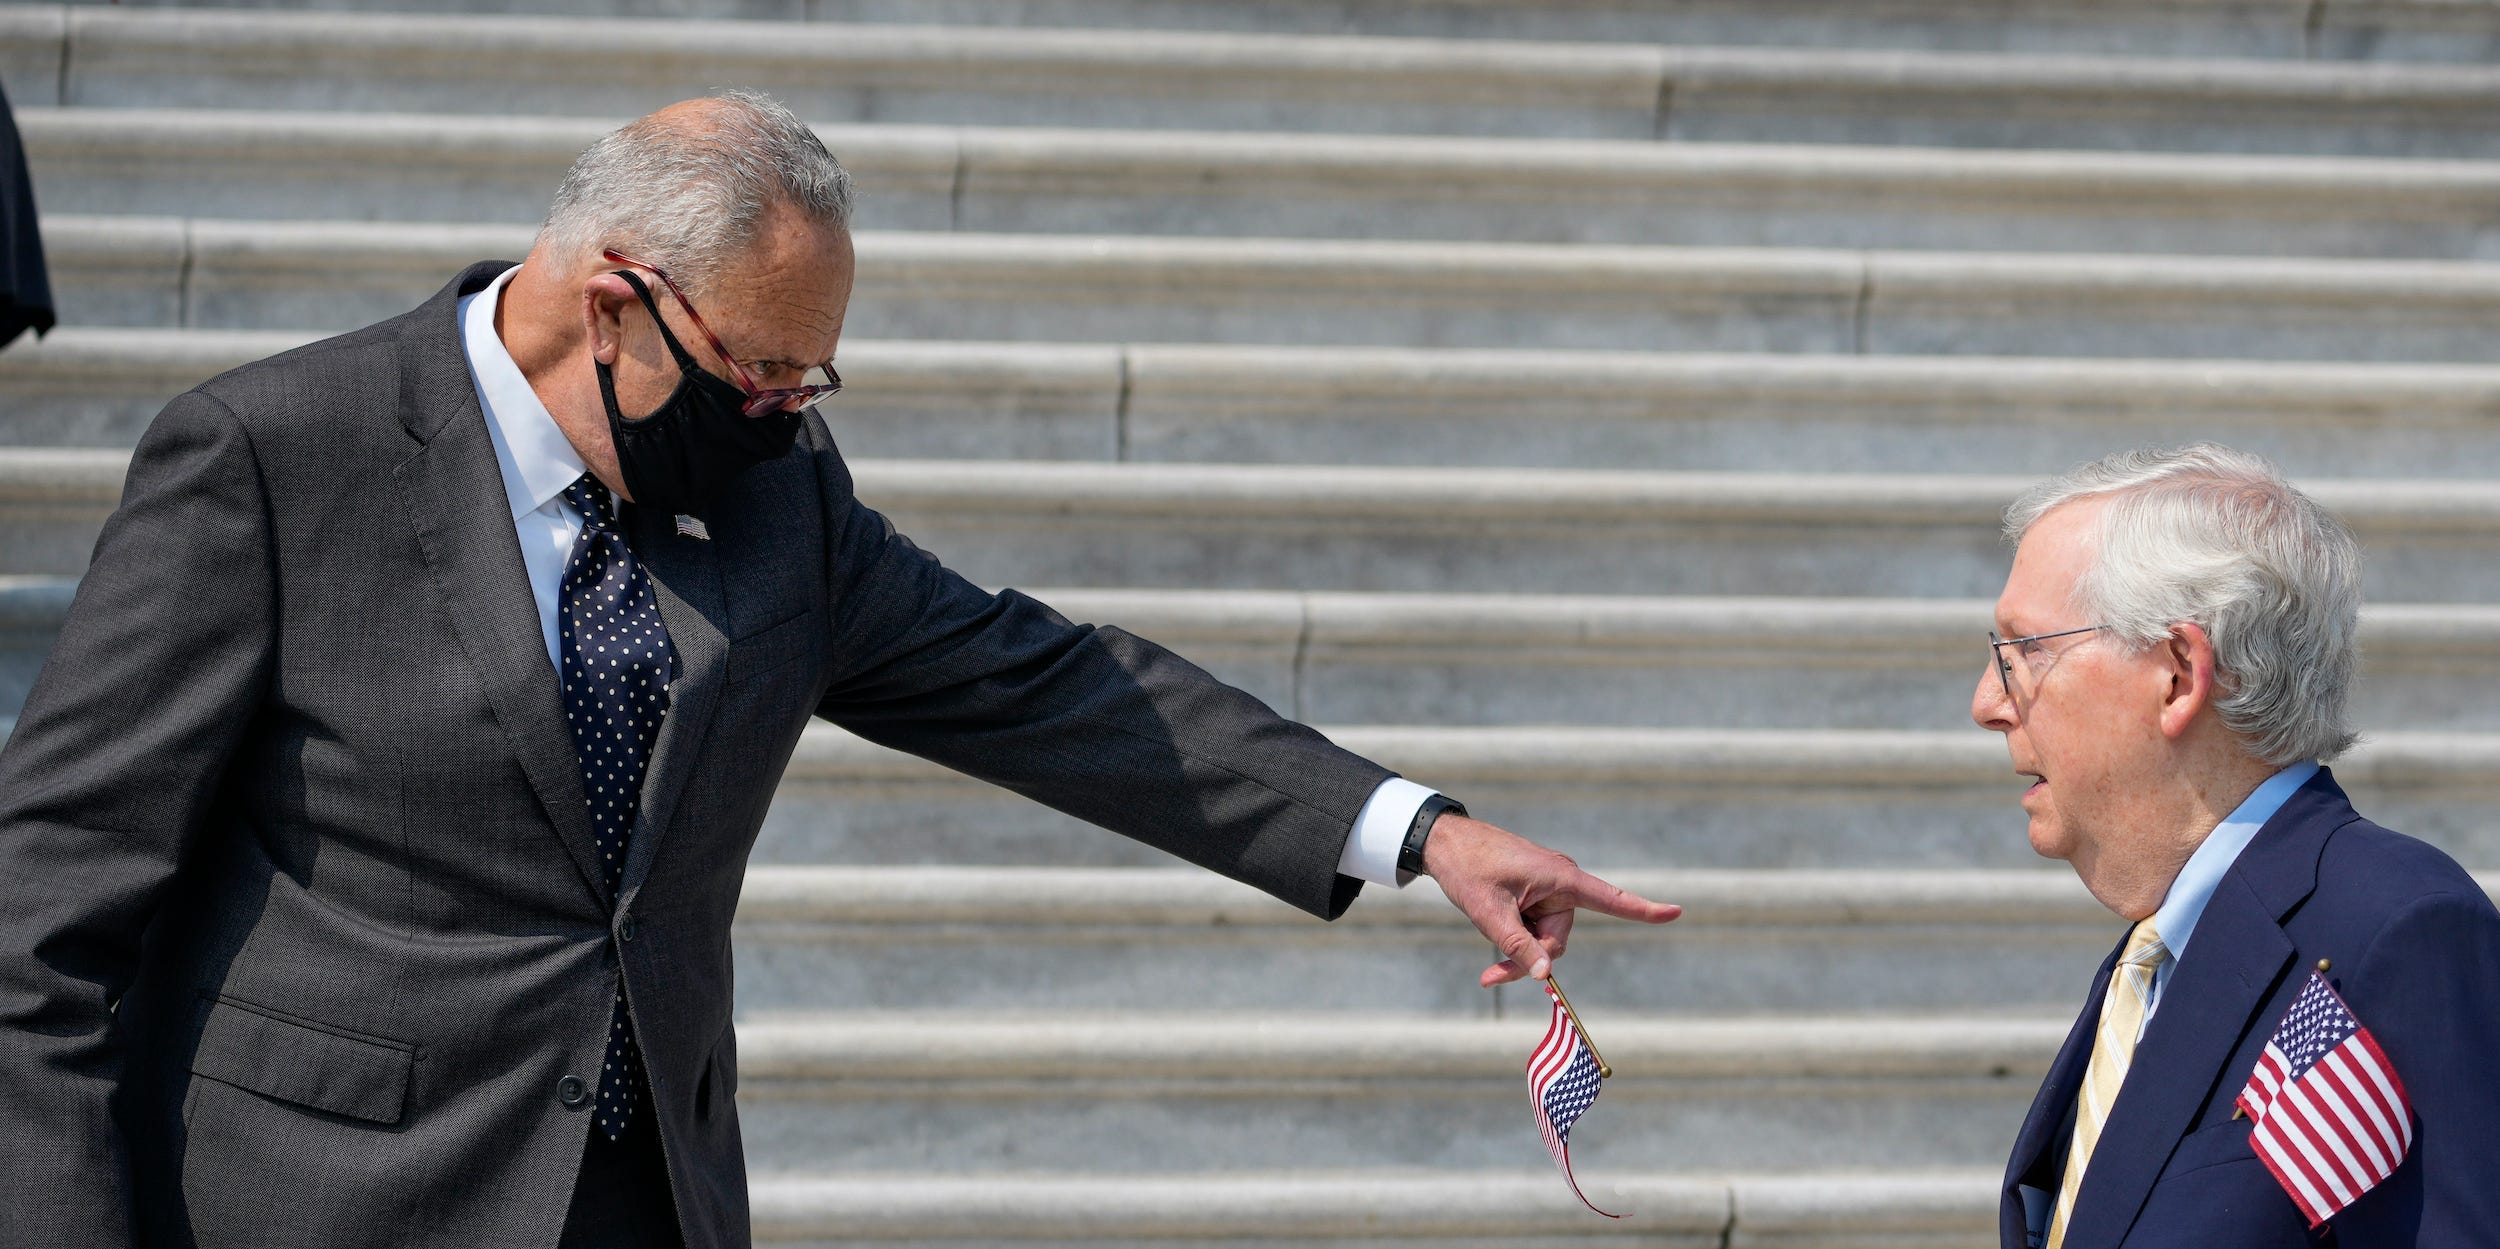 Senate Majority Leader Chuck Schumer (D-NY) points at Senate Minority Leader Mitch McConnell as they arrive for a remembrance ceremony marking the 20th anniversary of the 9/11 terror attacks on the steps of the U.S. Capitol, on September 13, 2021 in Washington, DC.